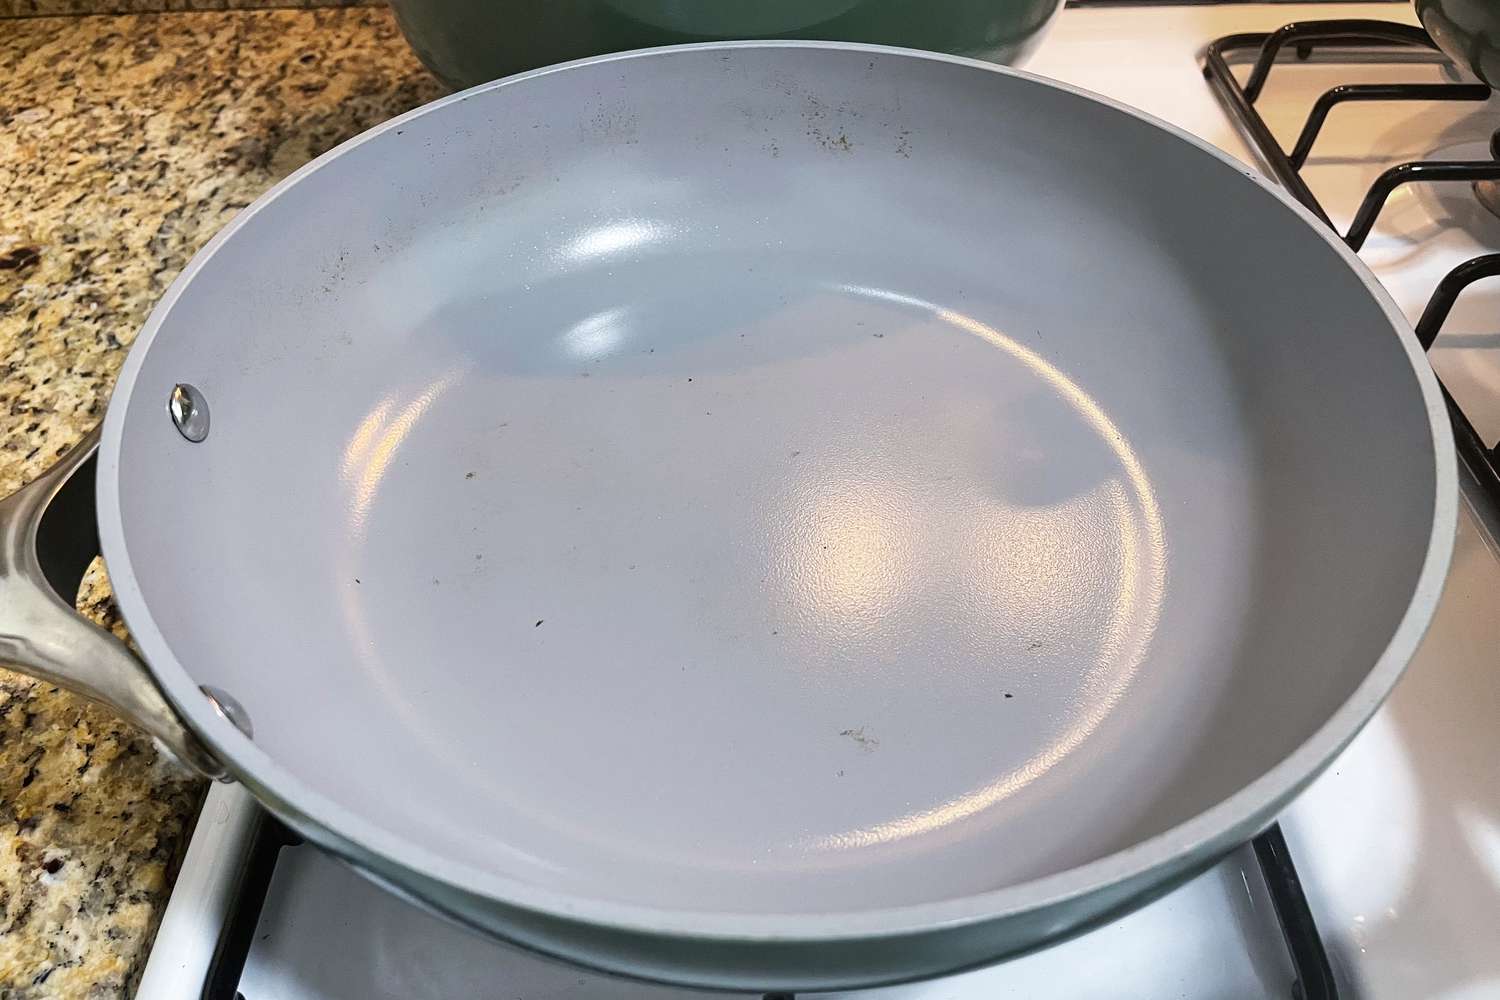 Caraway frying pan after 18 months of use, small dark spots on coating